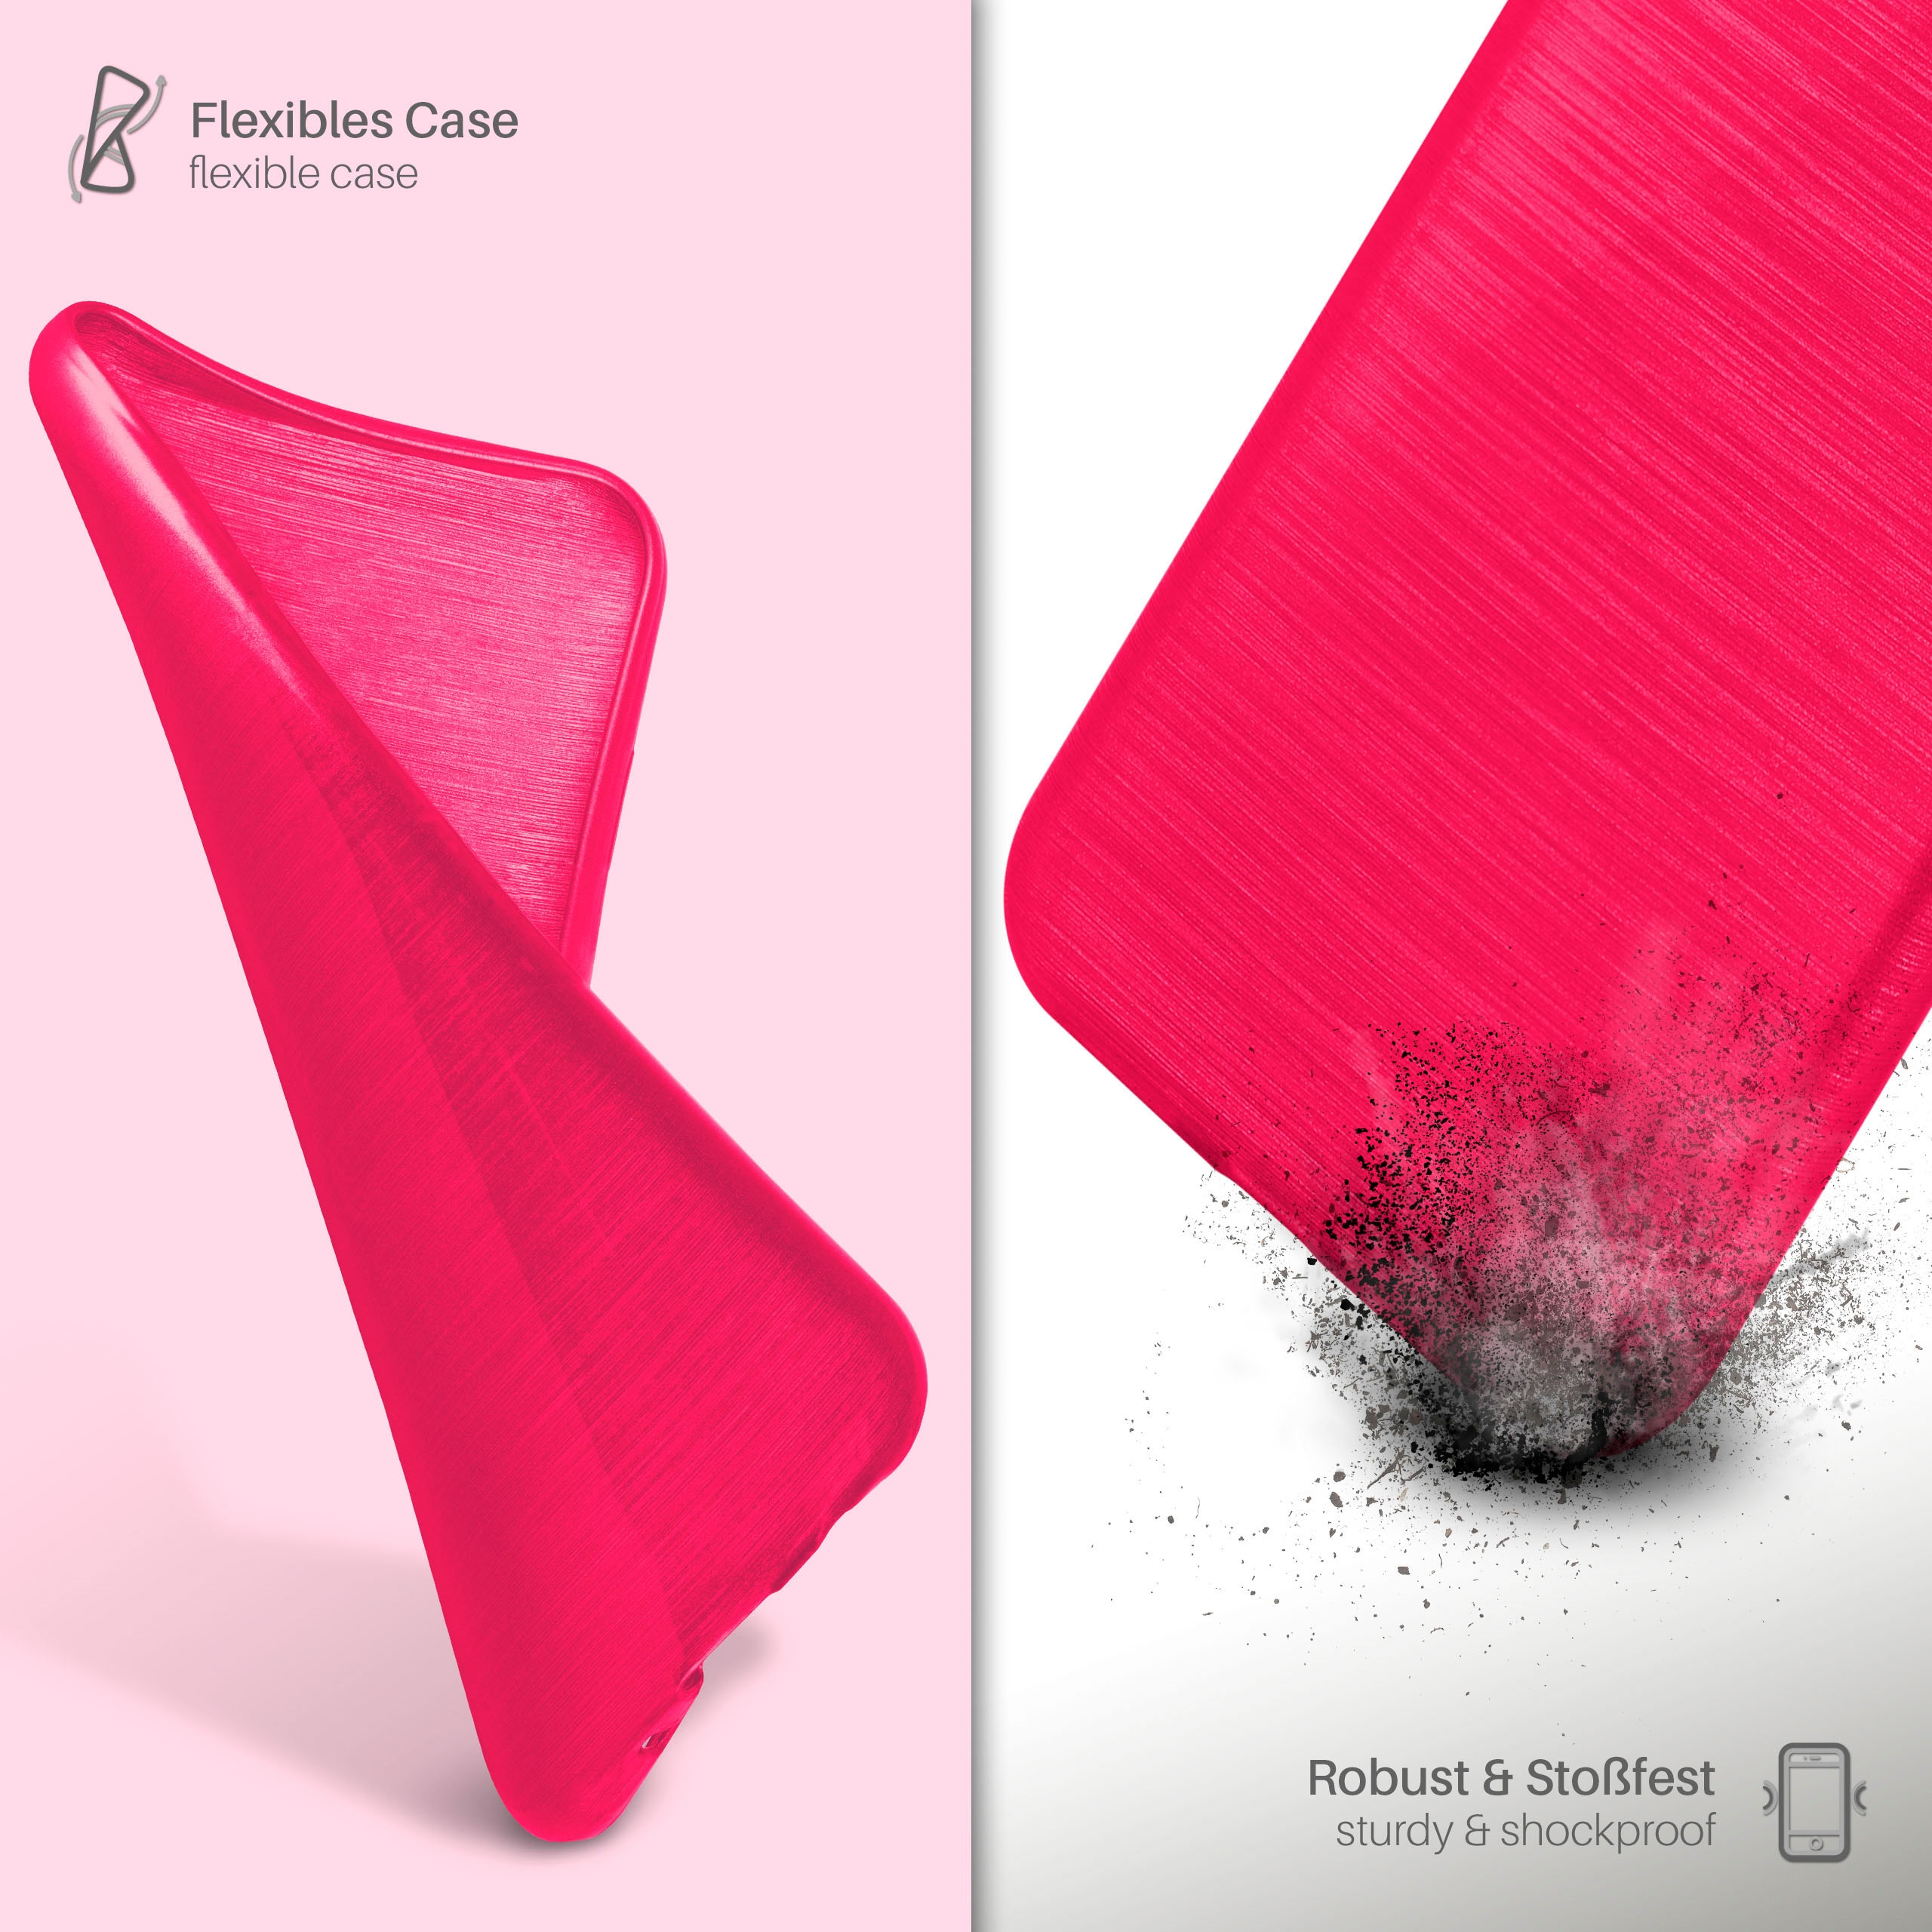 MOEX Brushed Case, Backcover, 8 Magenta-Pink iPhone Apple, iPhone Plus, / 7 Plus